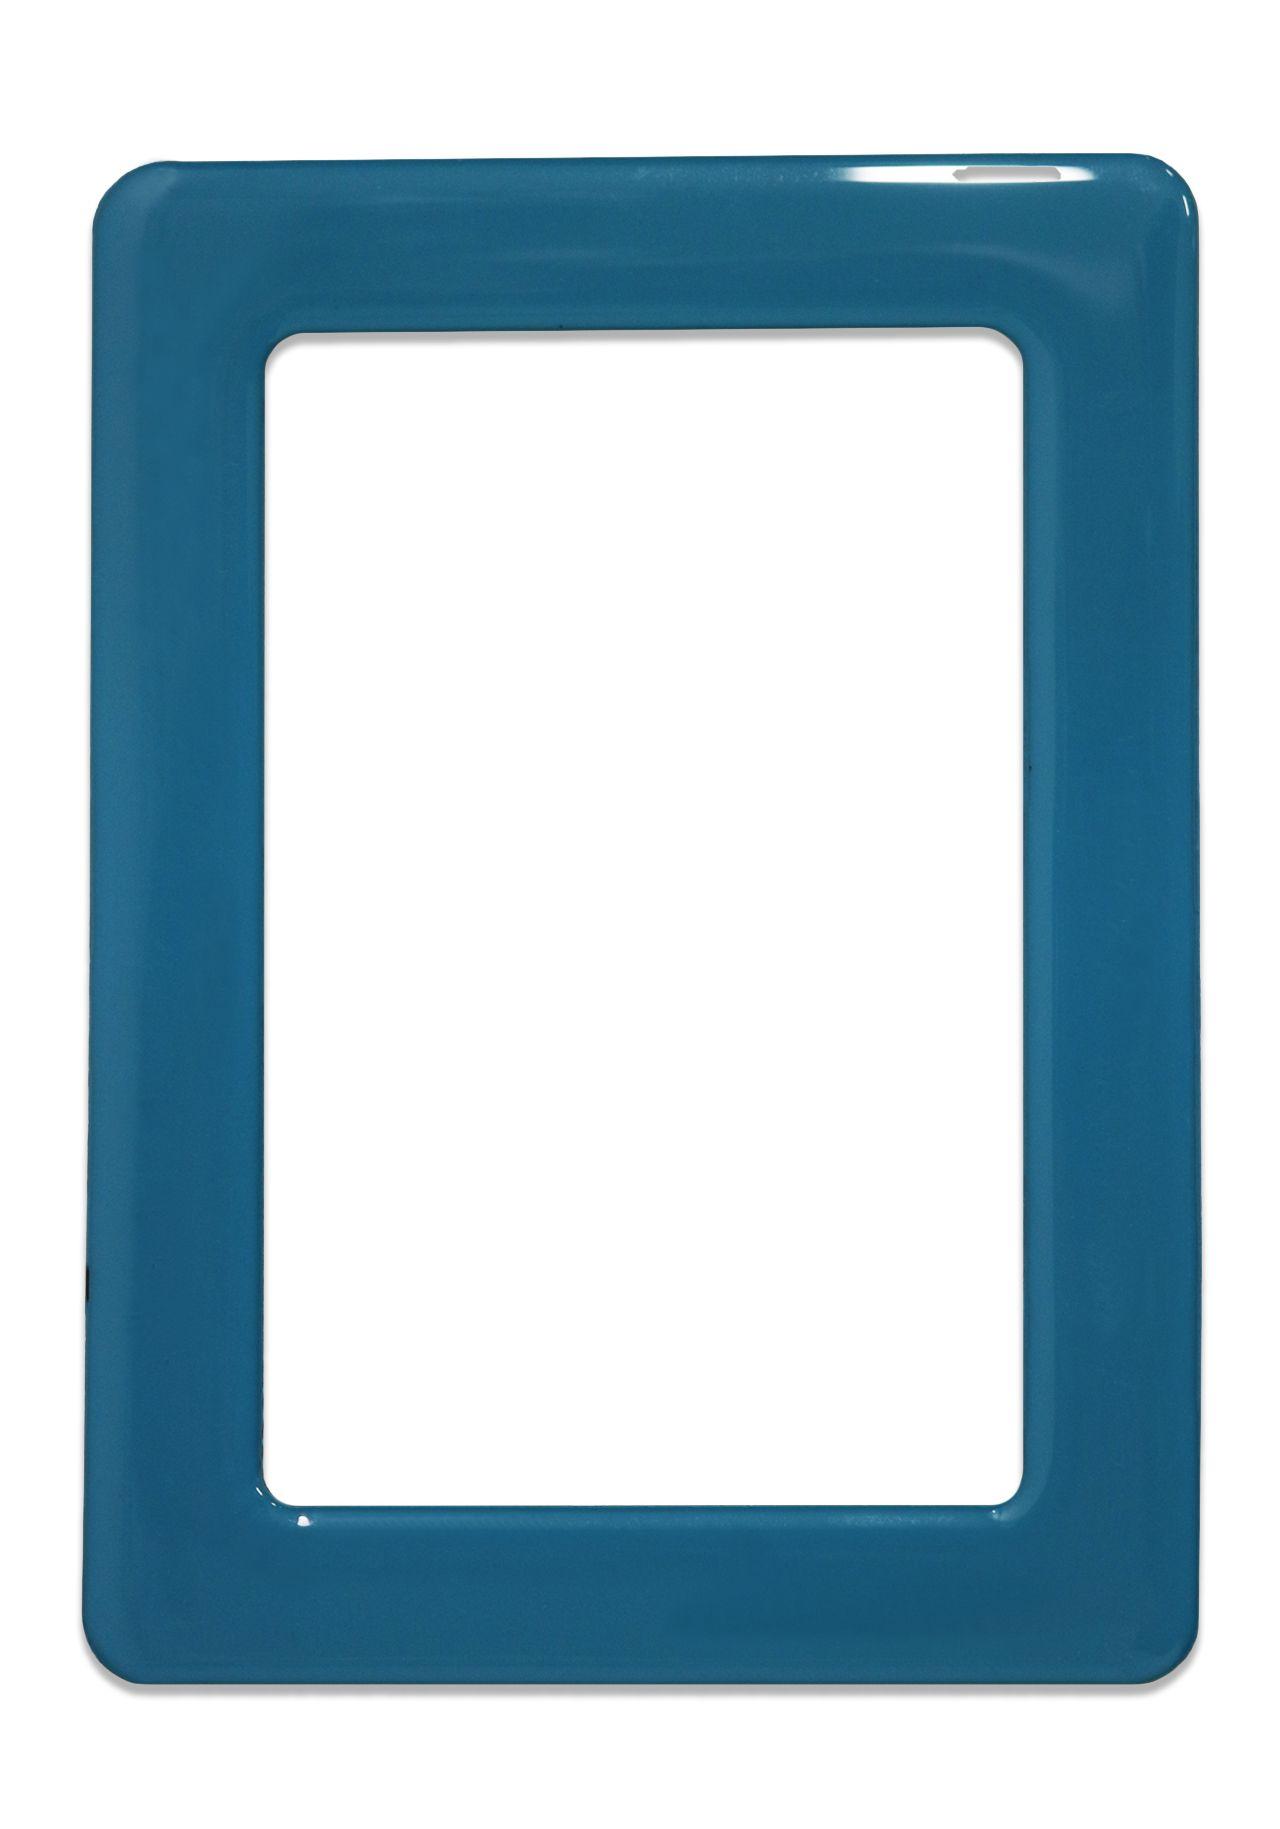 Magnetic self-adhesive frame size 12.3x8.1cm - turquoise